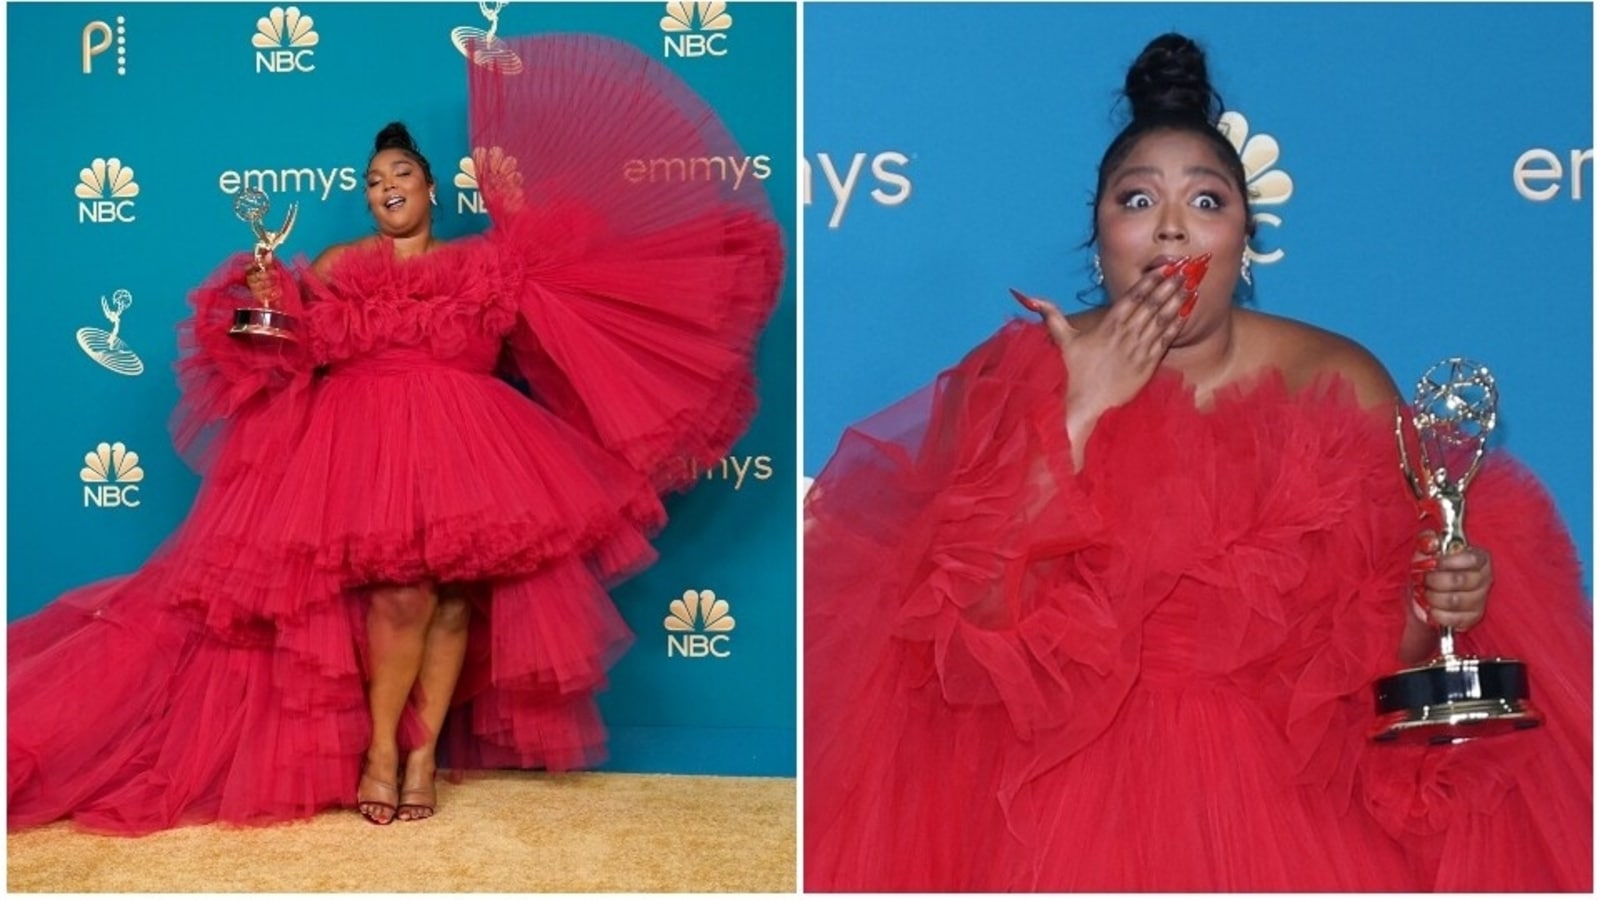 Lizzo wins big at the Emmy Awards 2022 in a jawdropping redhot gown